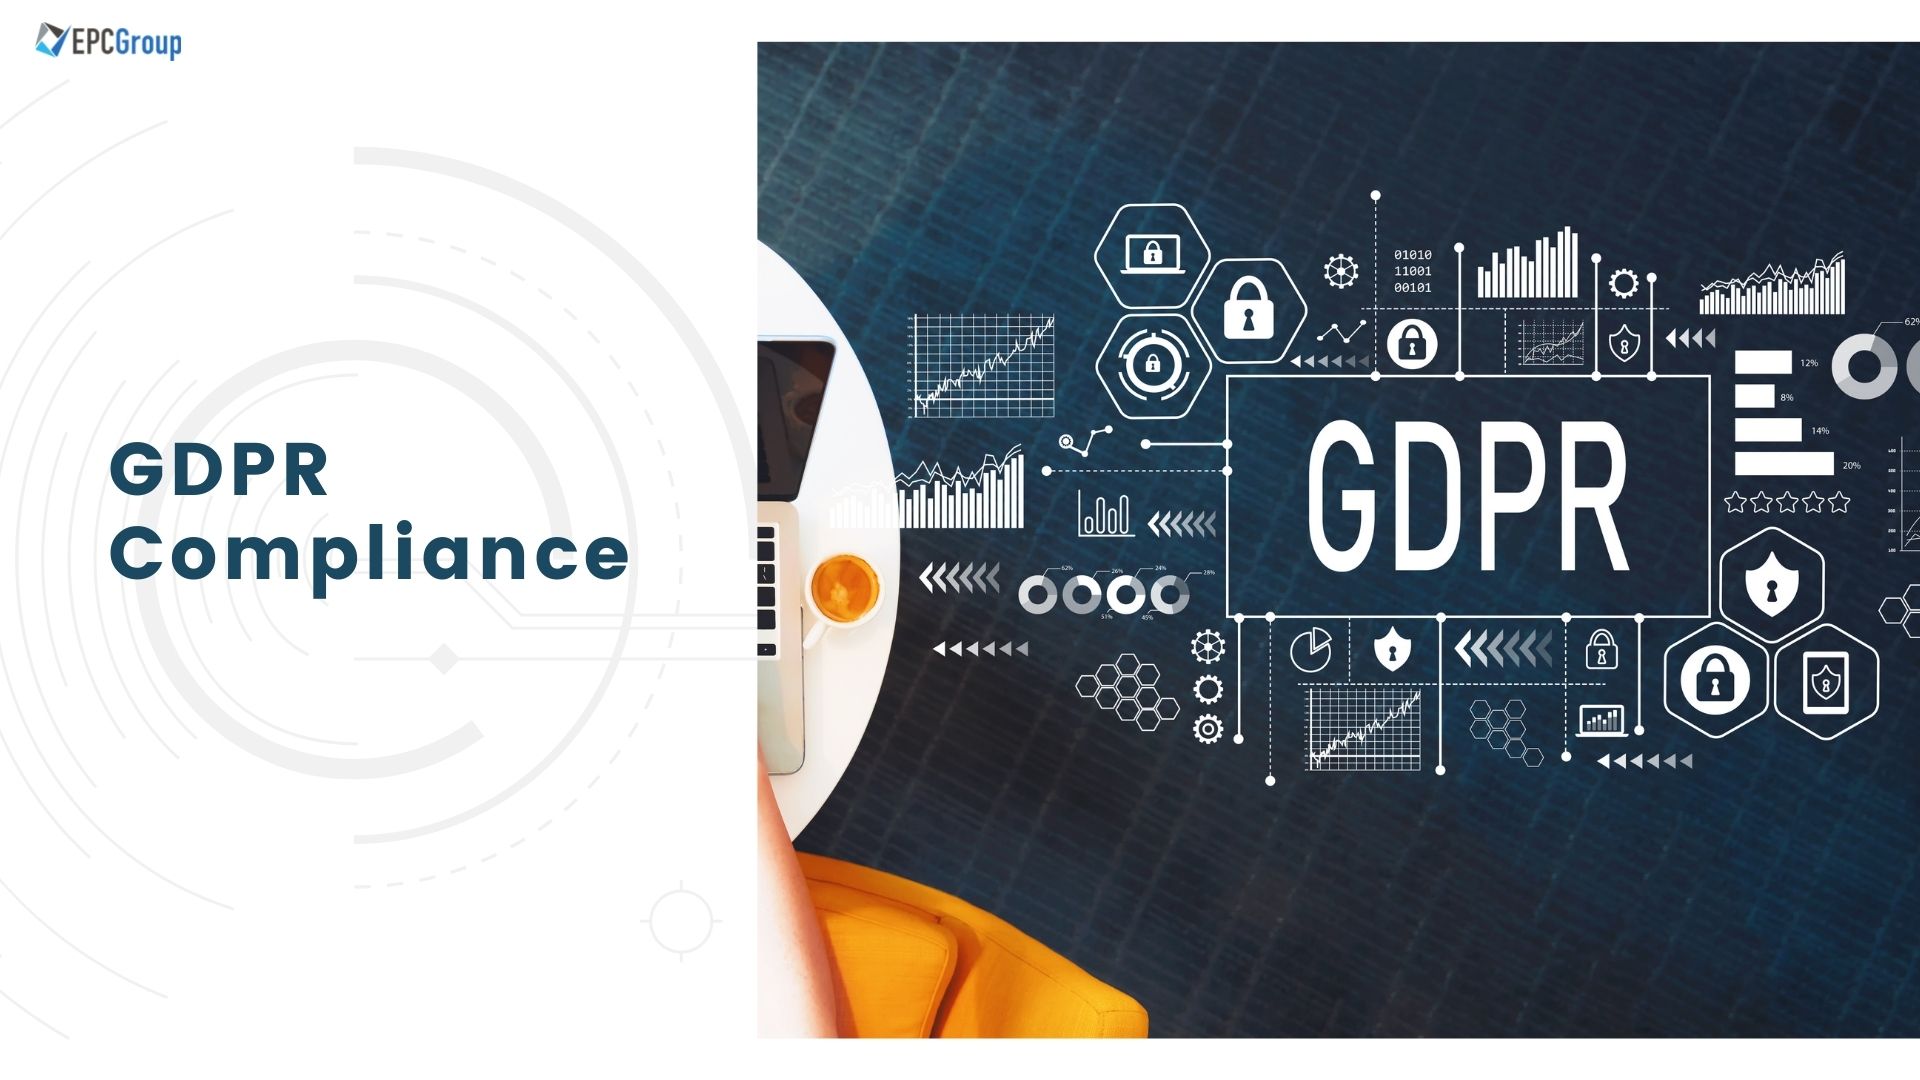 3 Steps To Become Complete GDPR Compliant